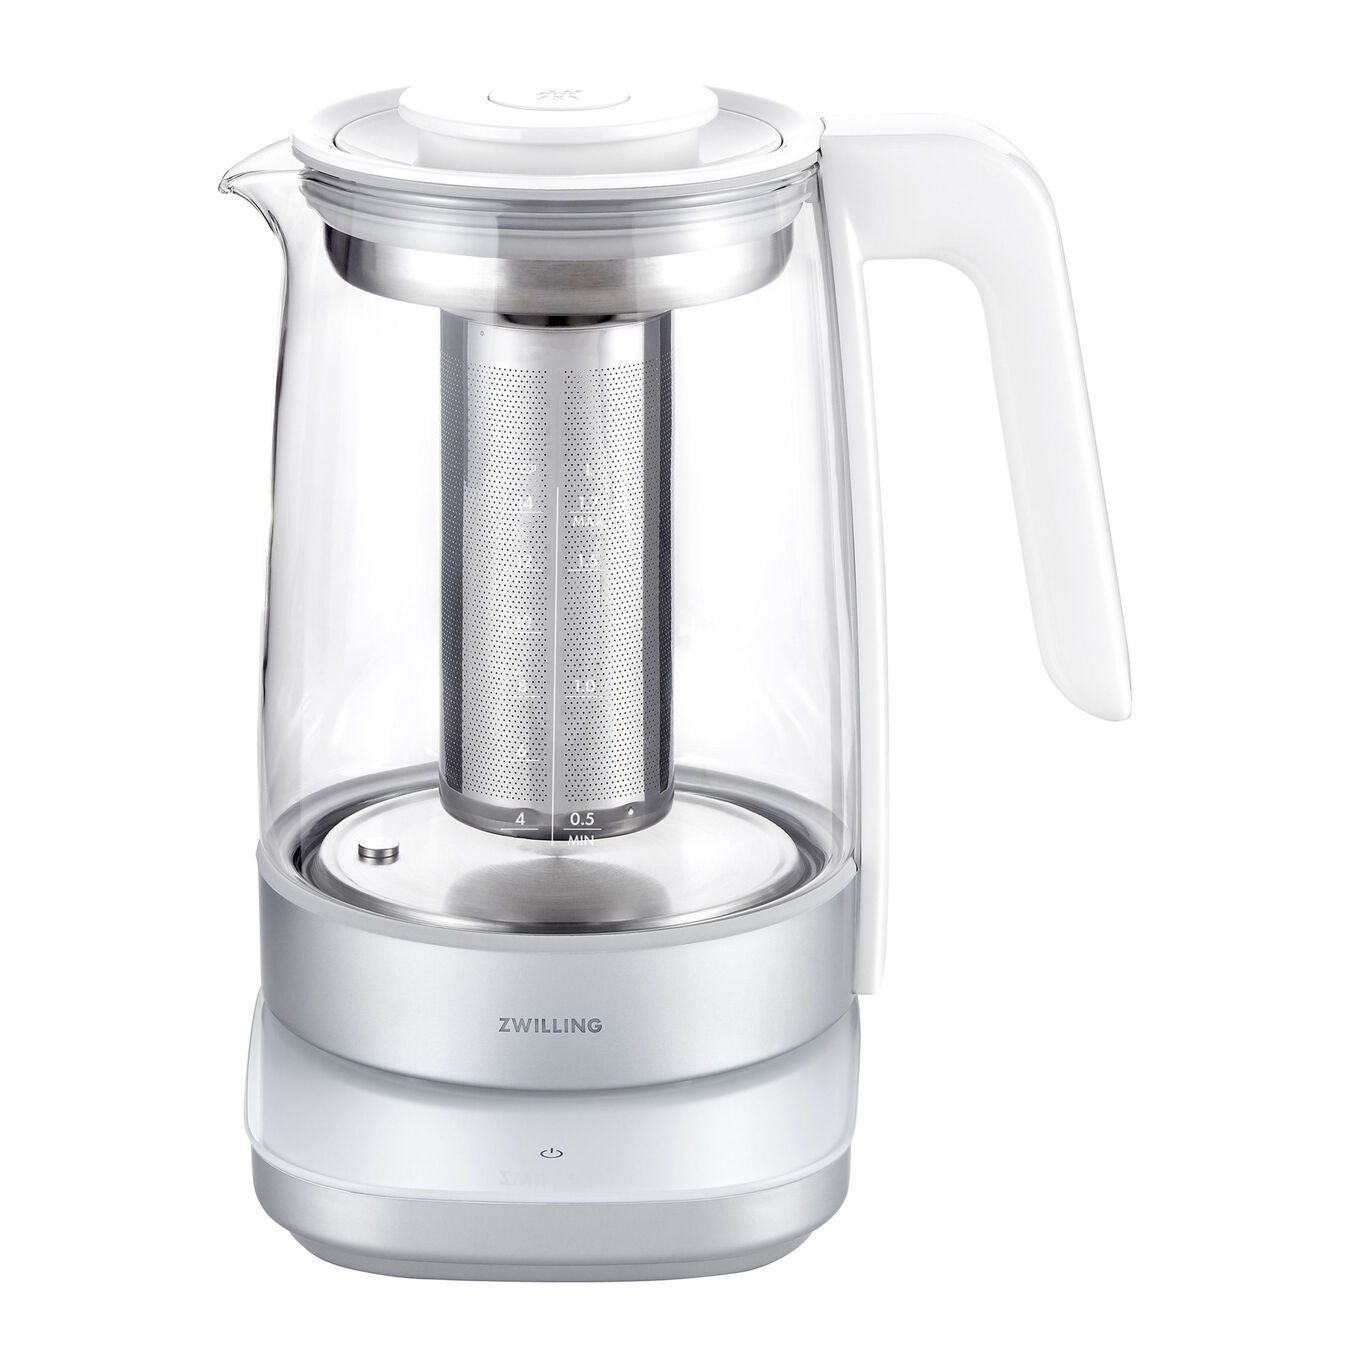 Electric kettle - silver,,large 1